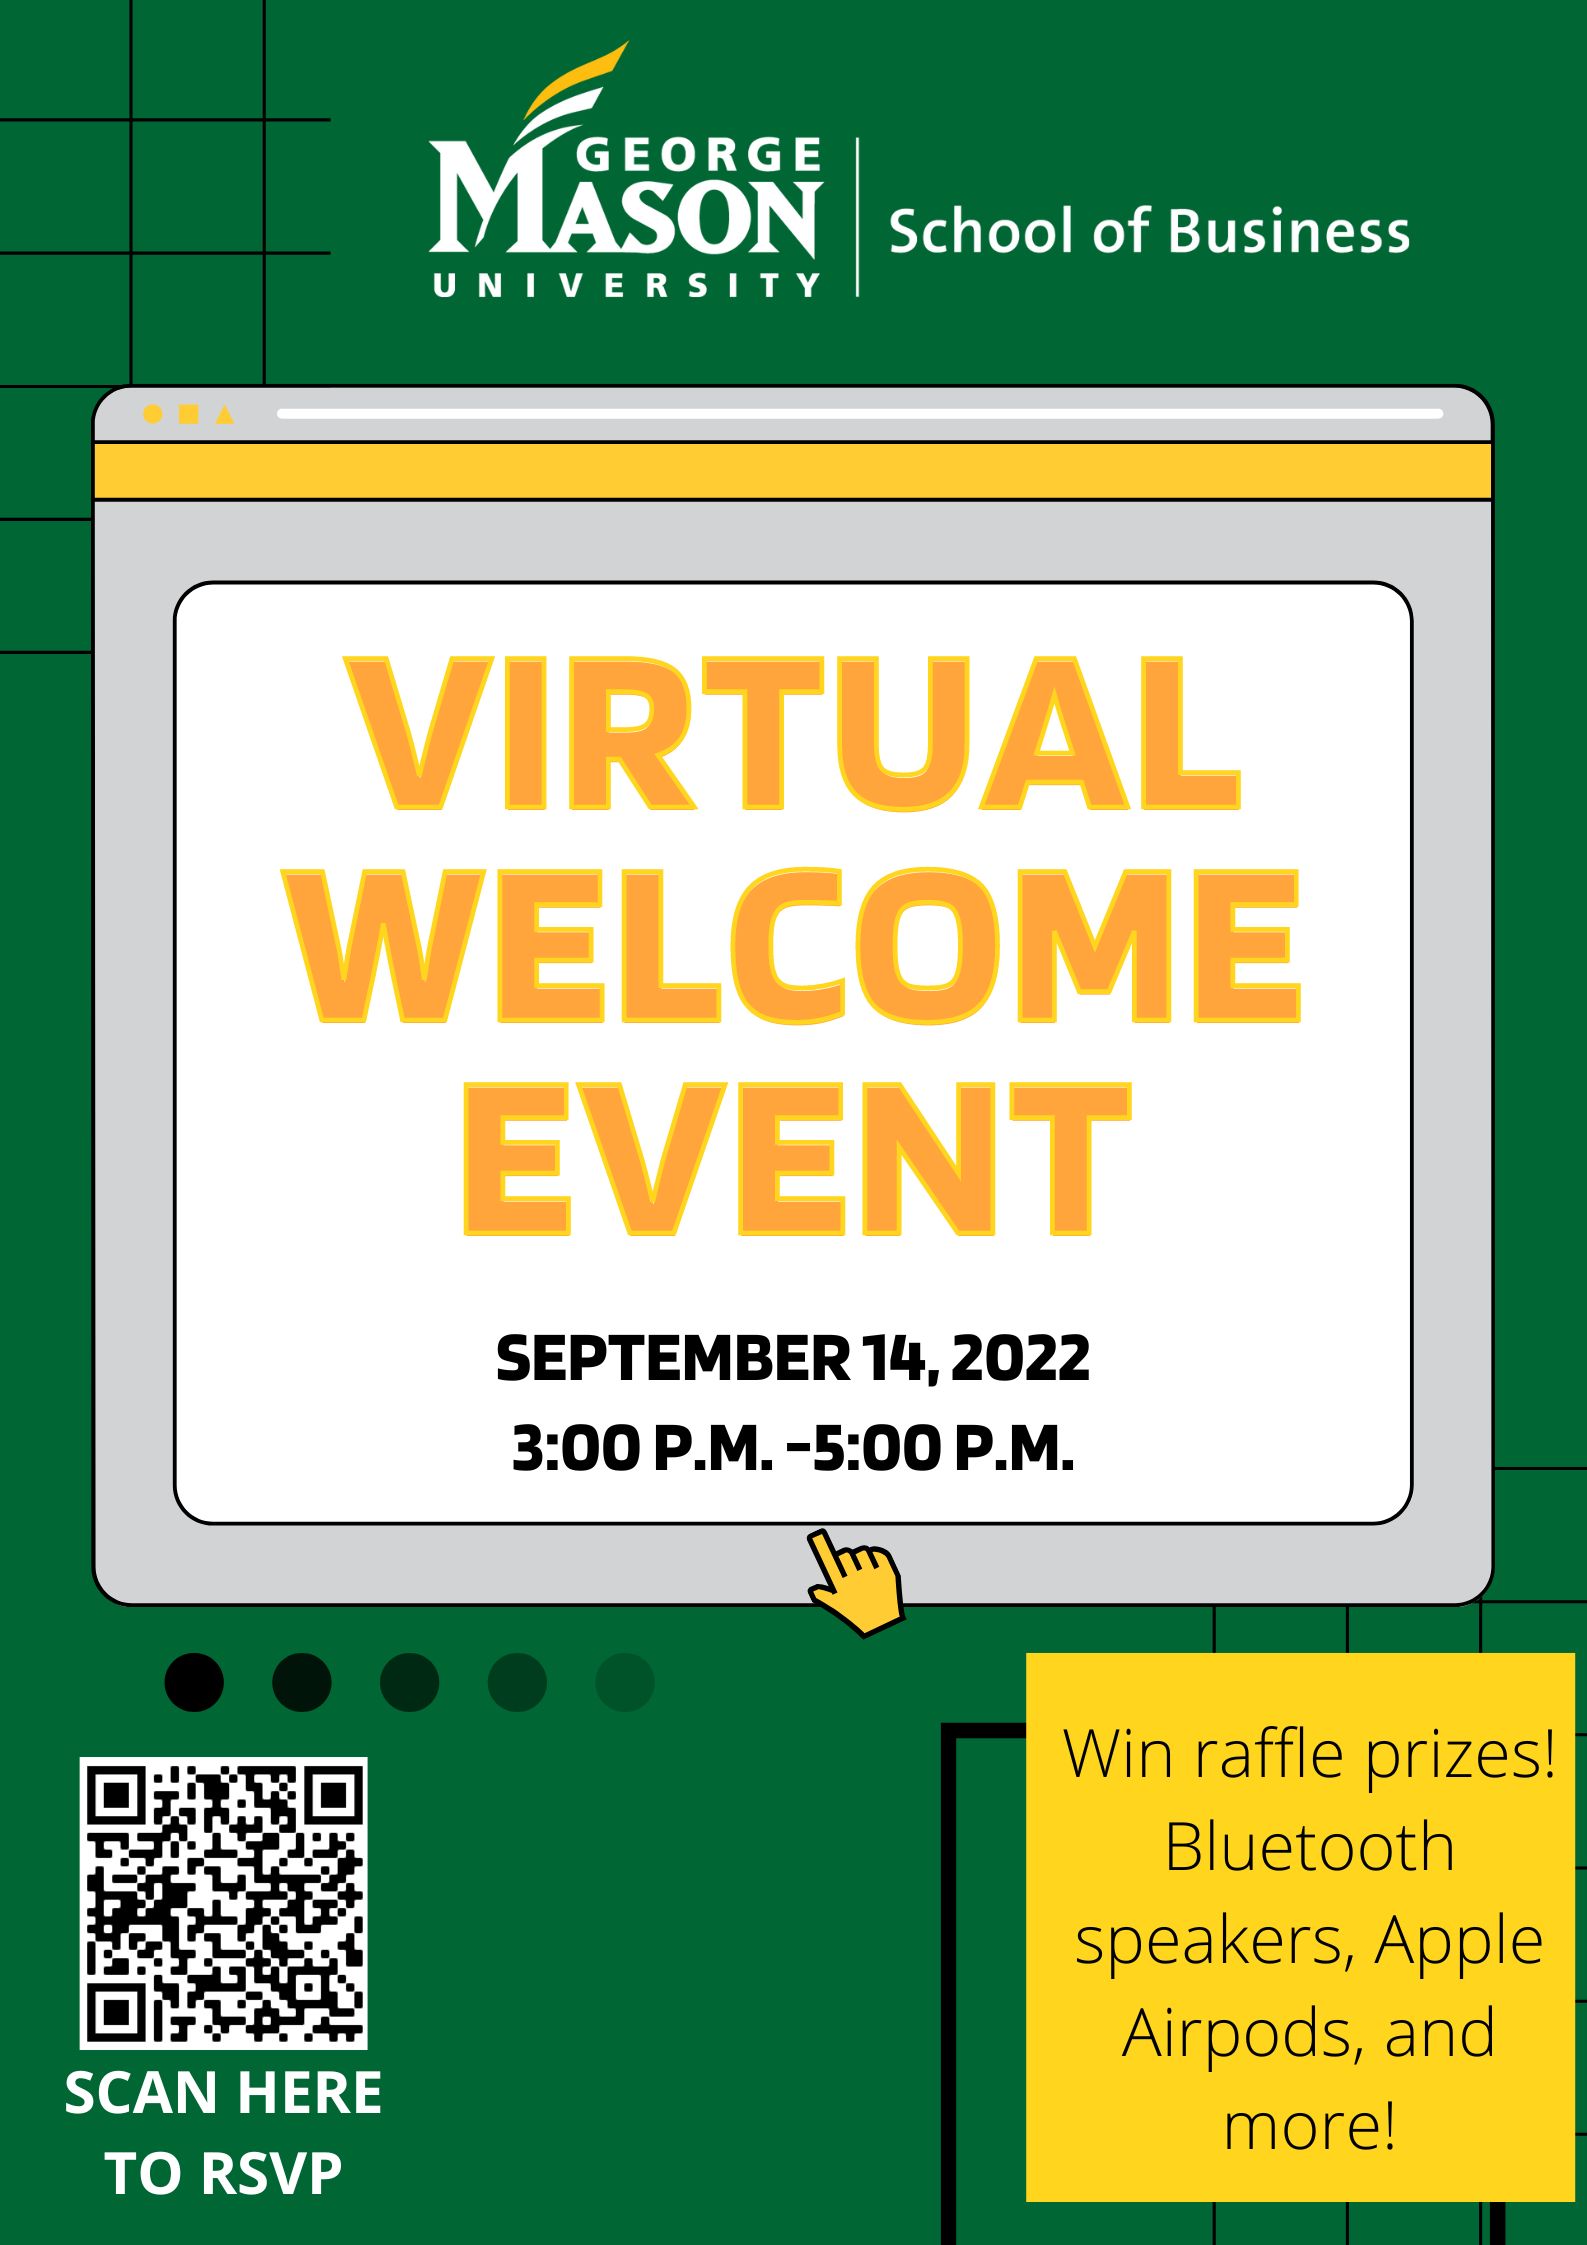 Flyer for online welcome event with registration link and September 14, 2022 date from 3:00-5:00 pm